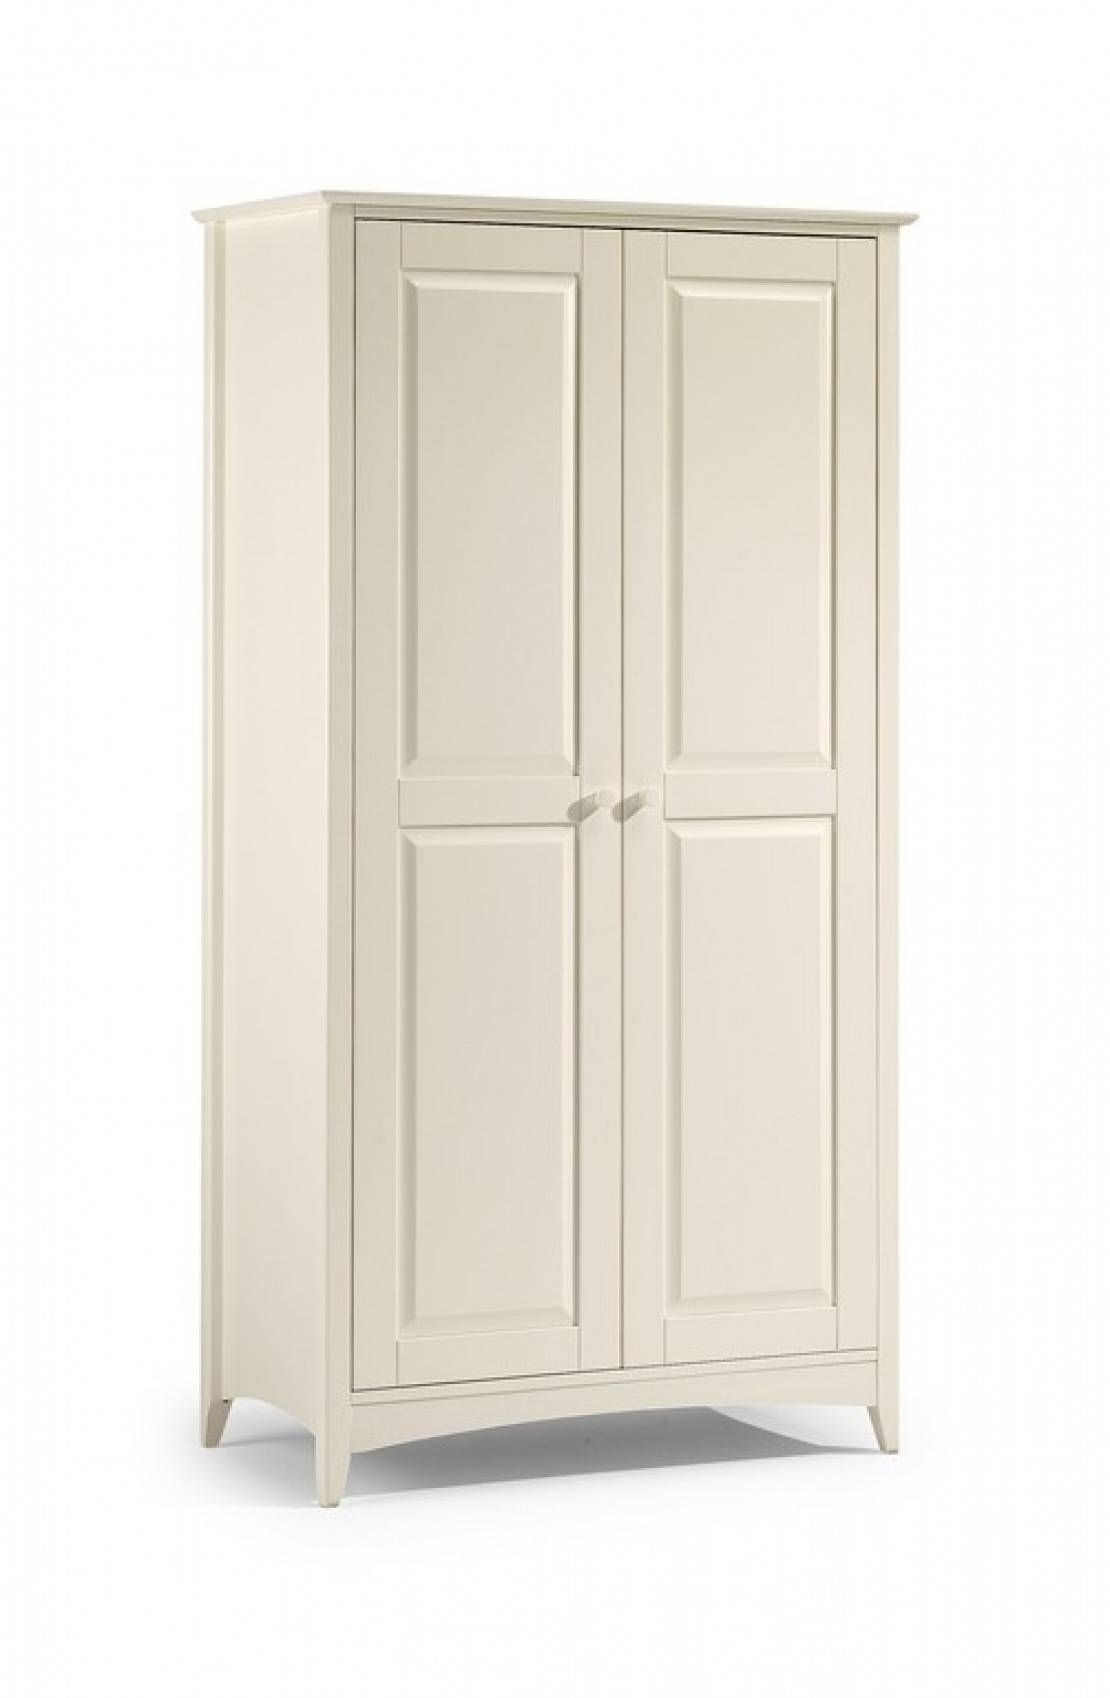 Cameo 2 Door Wardrobe | Wardrobes At Elephant Beds, Cardiff | Uk Throughout Cameo Wardrobes (View 2 of 15)